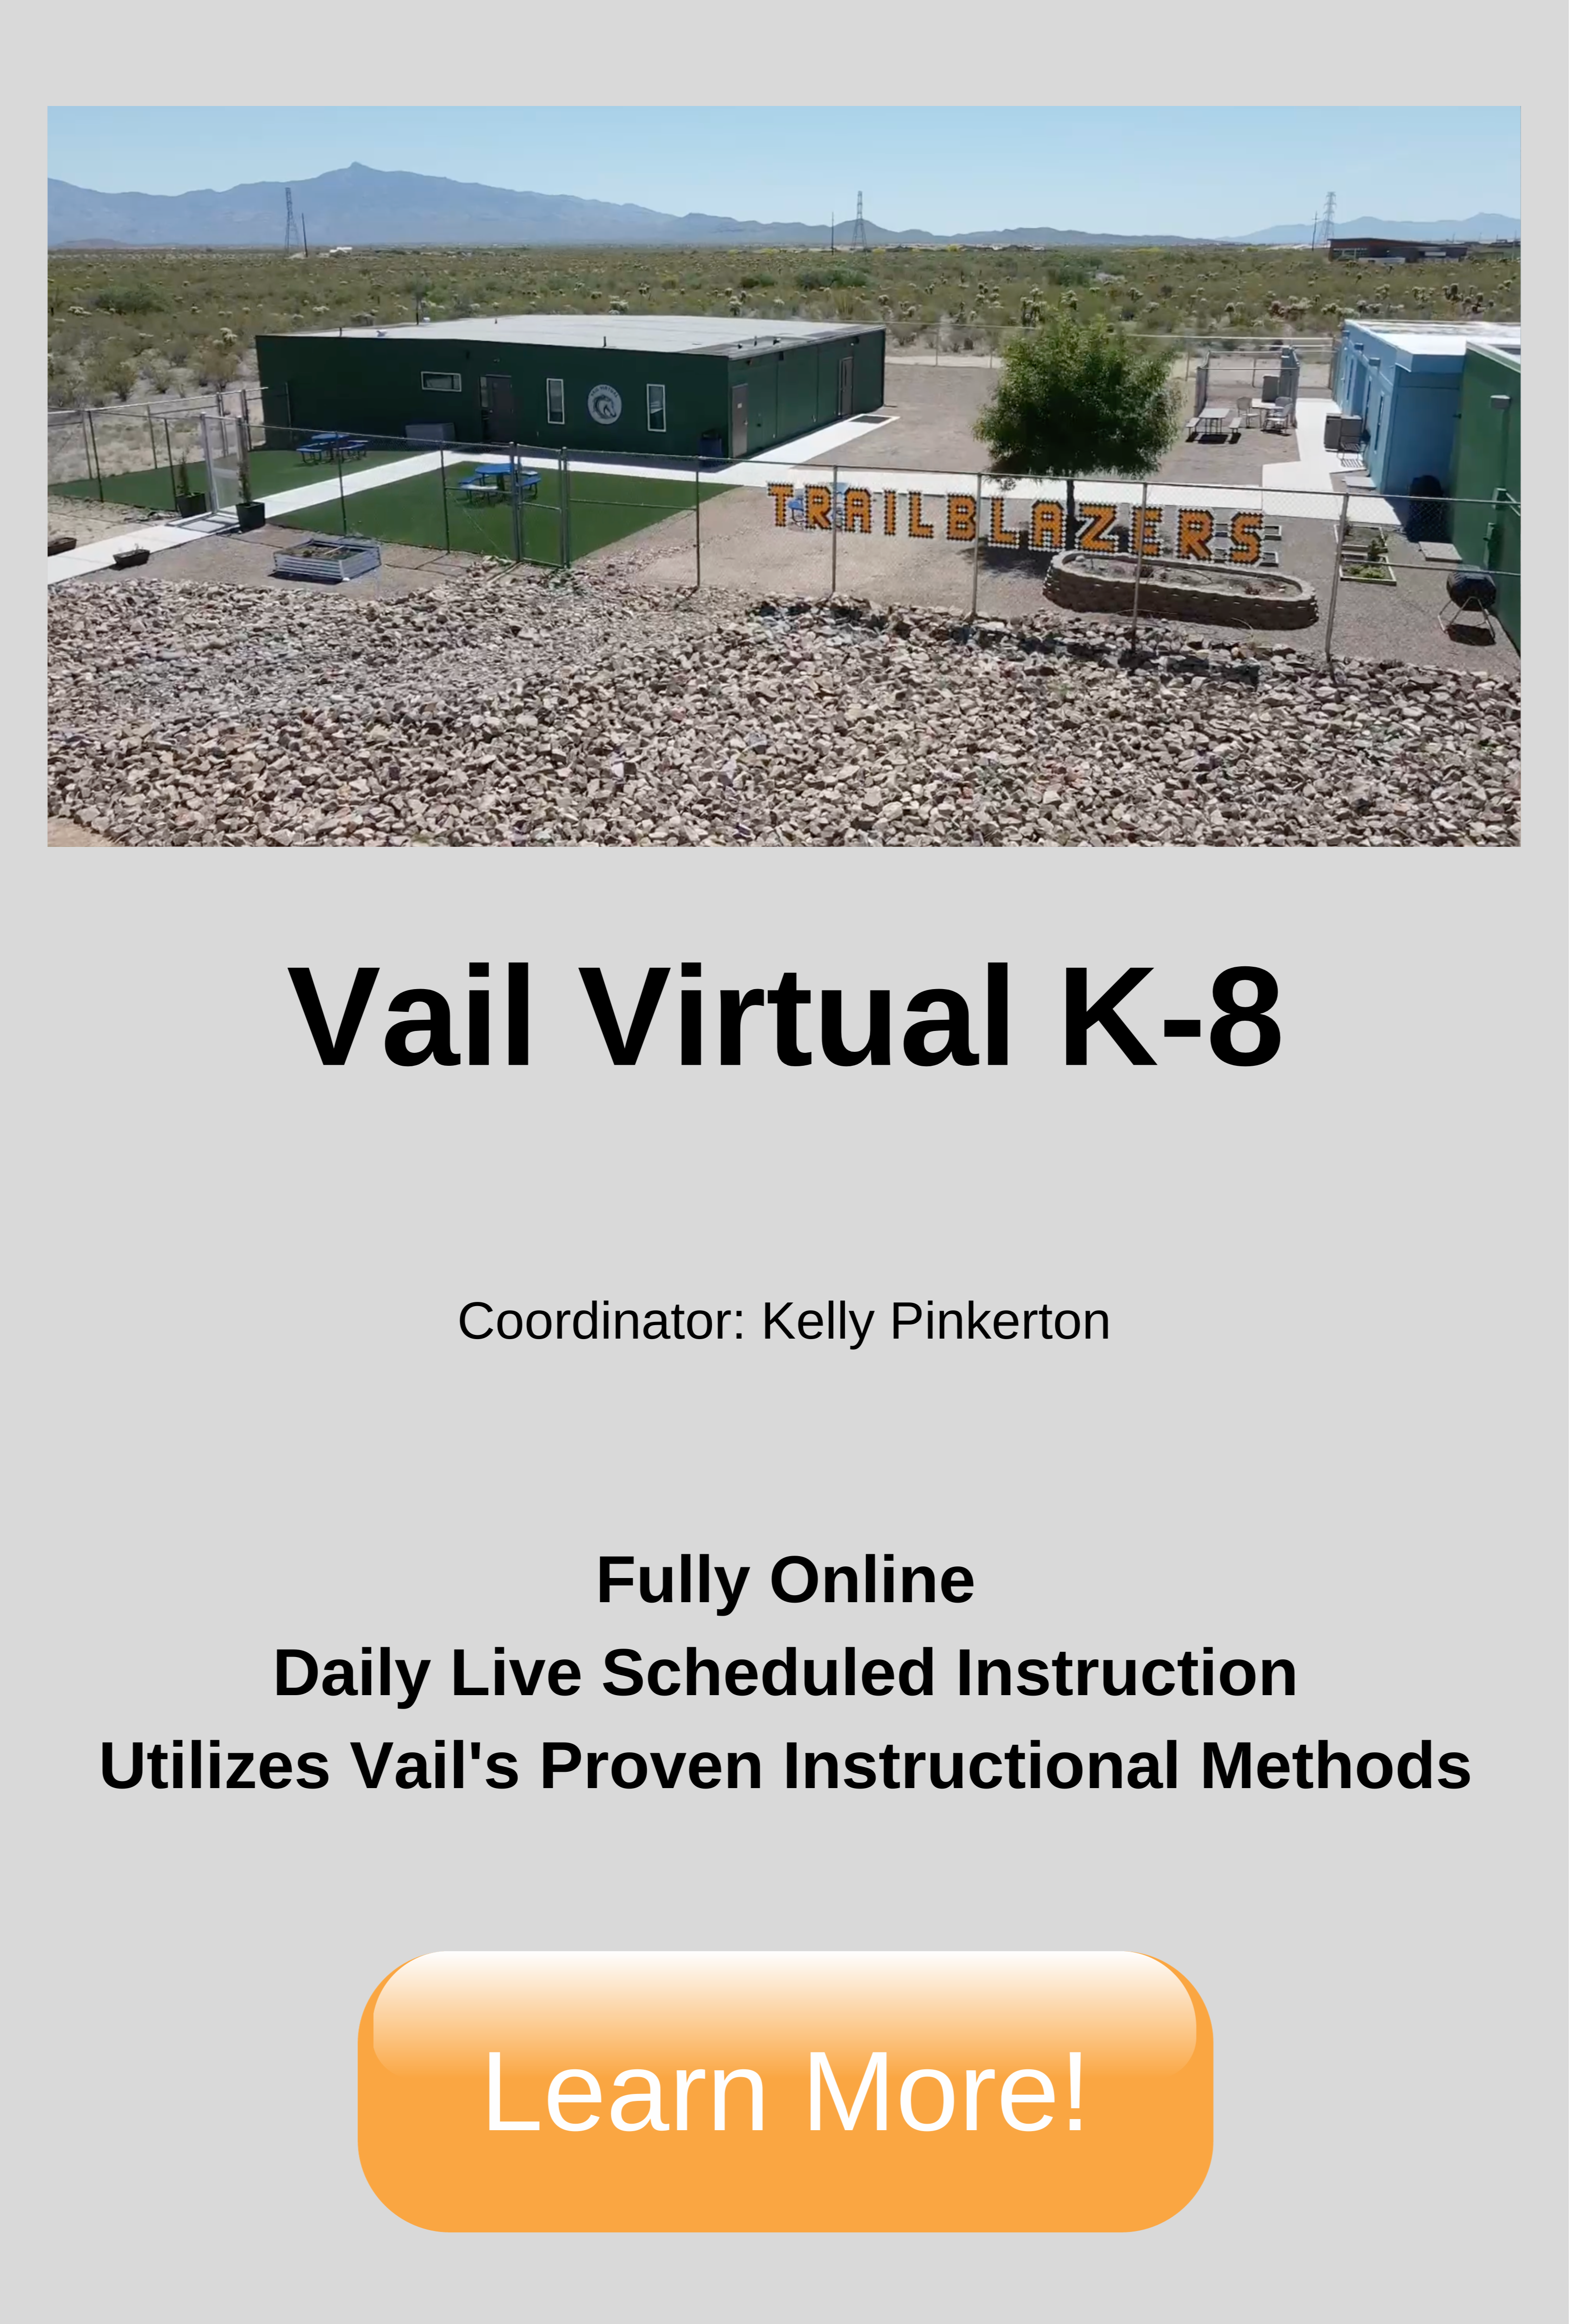 Vail Innovation Center. 10775 E Mary Ann Cleveland Way Coordinator: Kristin Murray Enrollment: 125-150 students. Click to learn more.